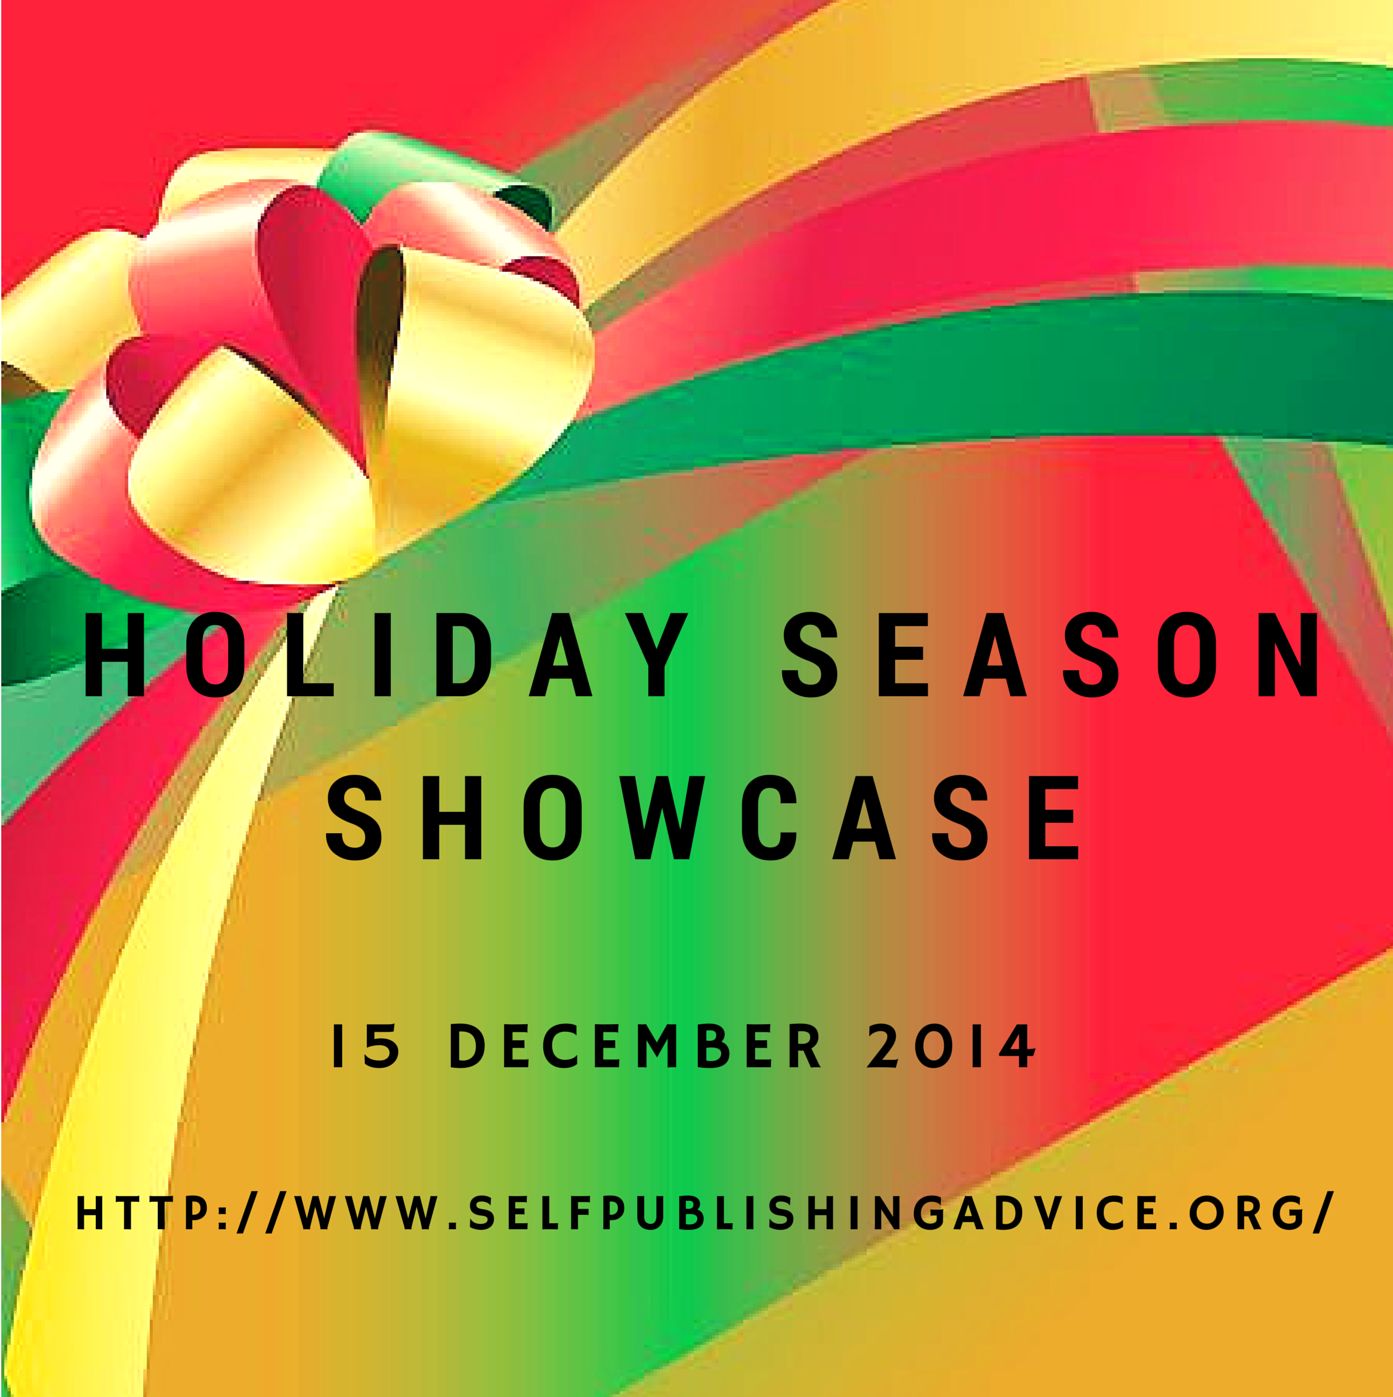 Holiday Season Showcase – Call Out For Contributions